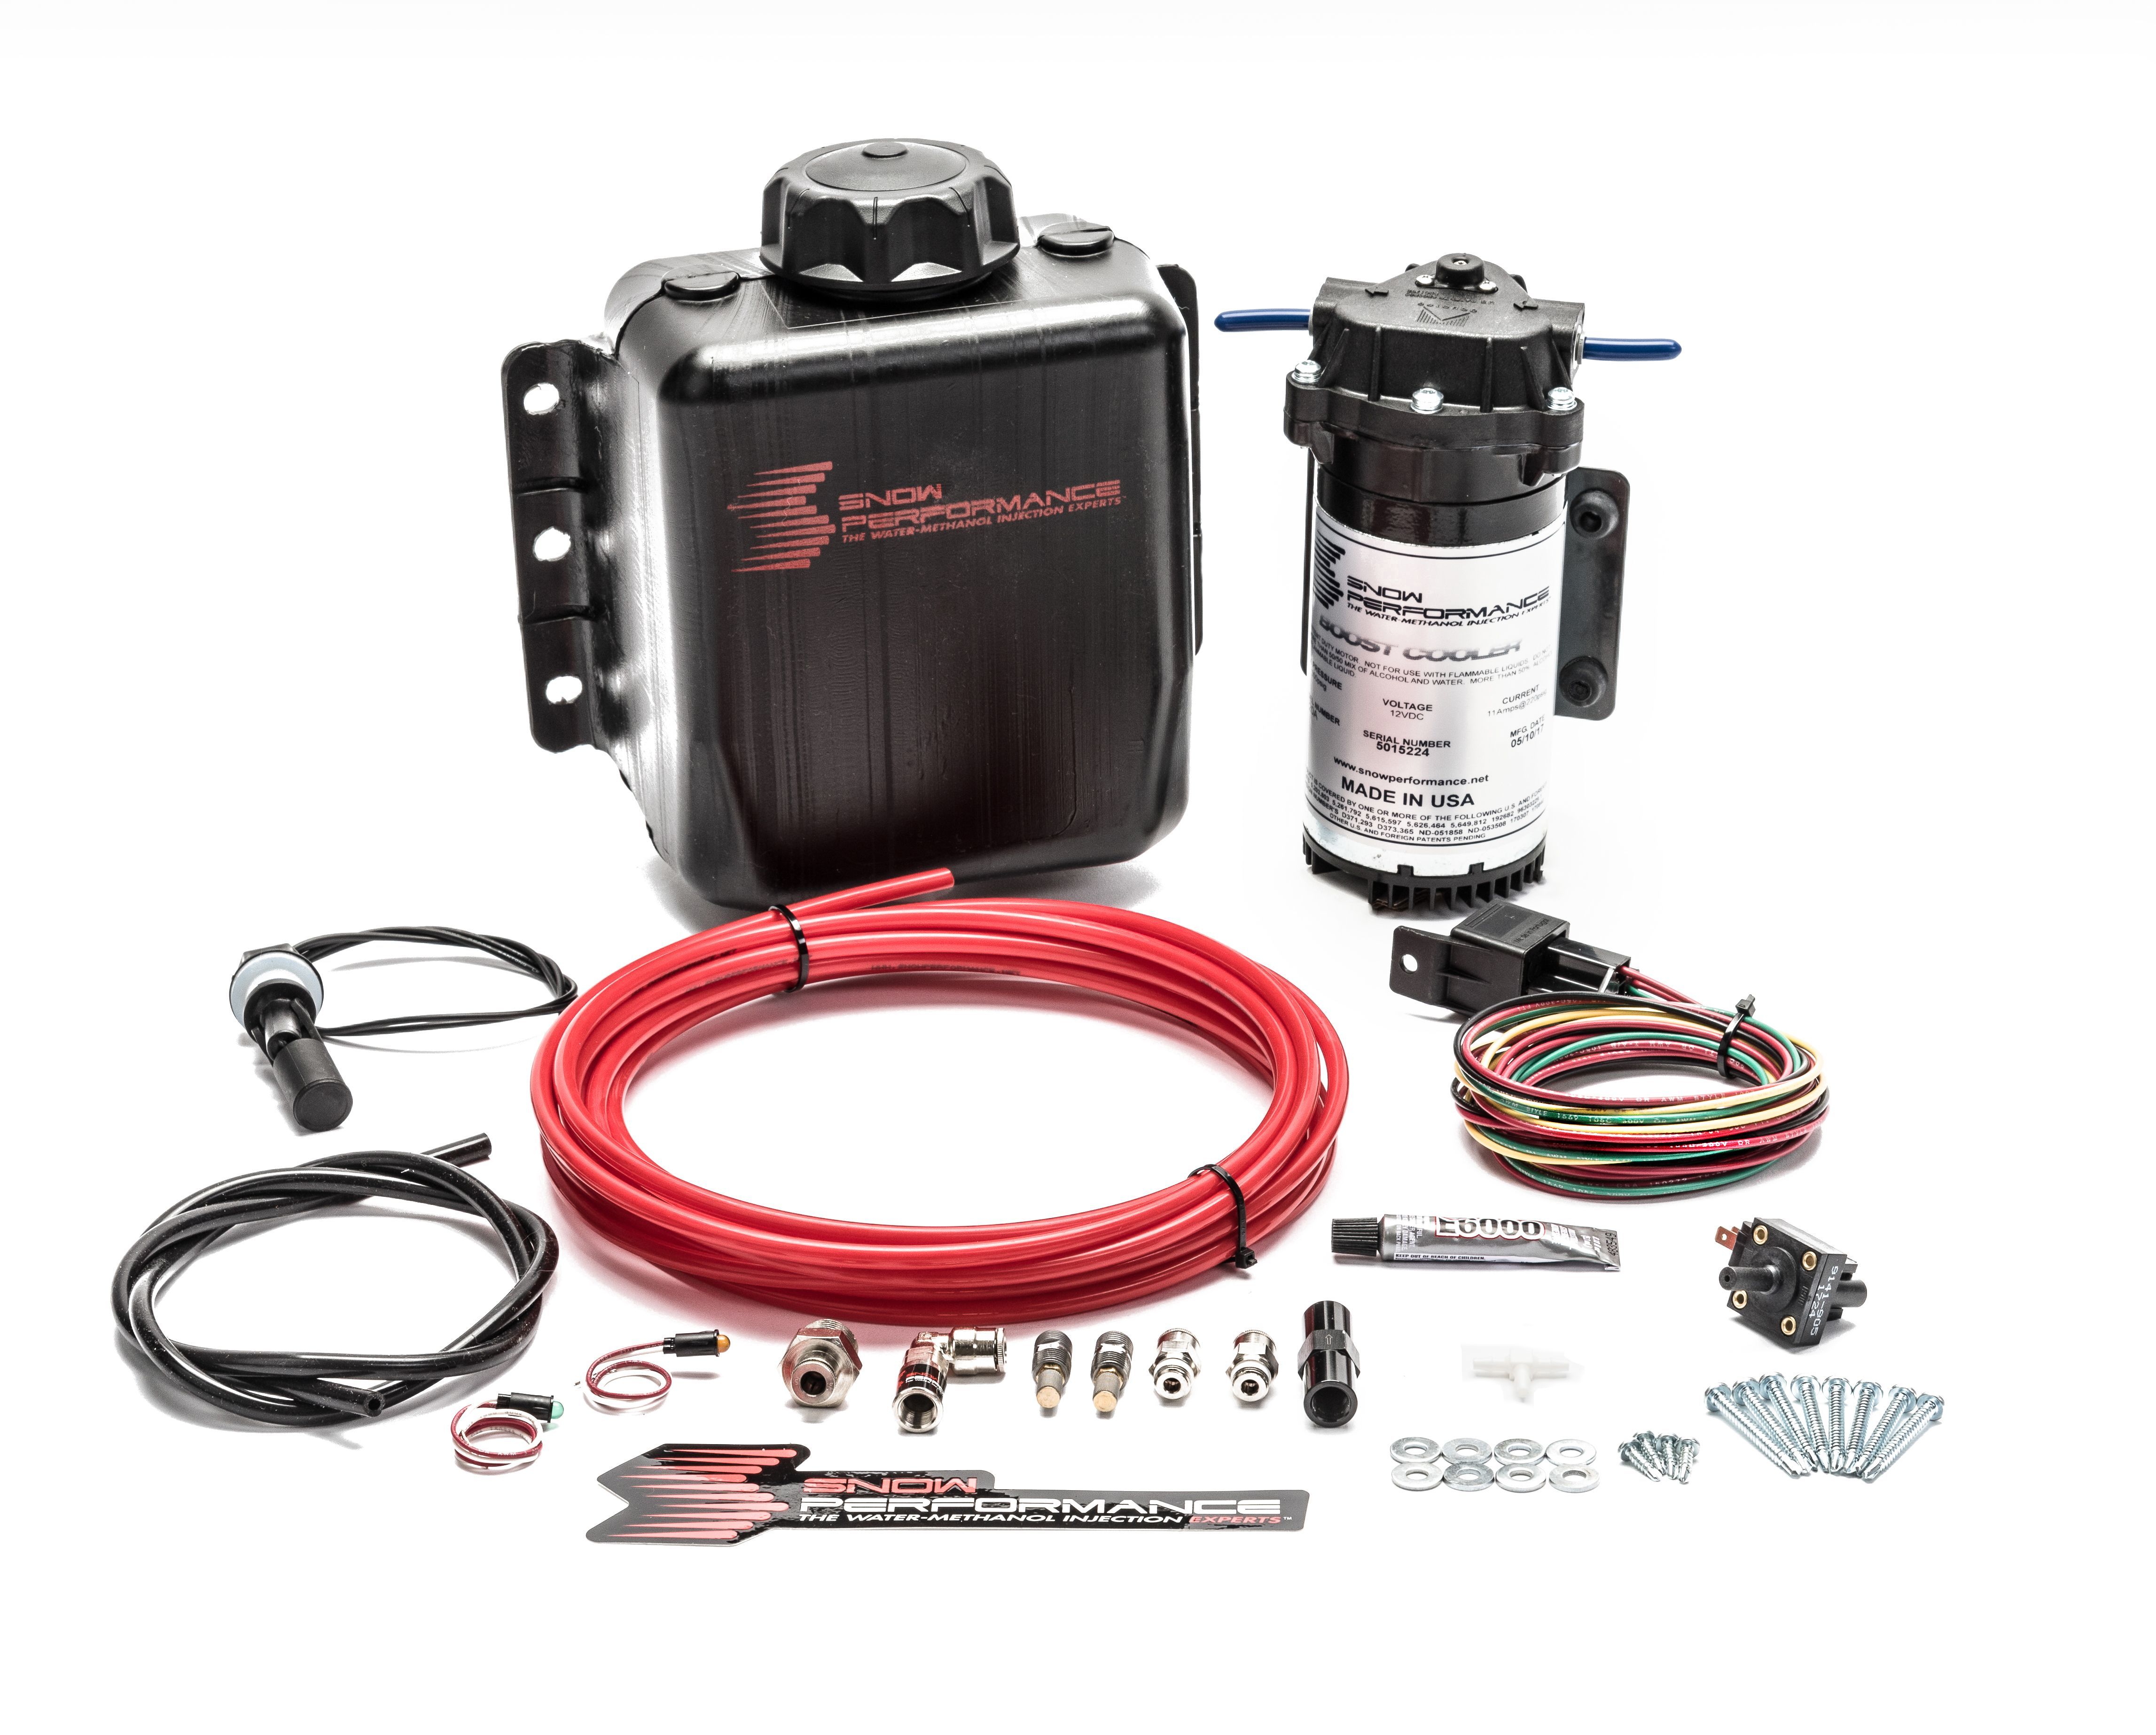 Snow Performance 201 Water Injection System, Stage 1 Boost Cooler, Boost Reference Controlled, 3 Gal Reservoir, Universal, Gas, Kit